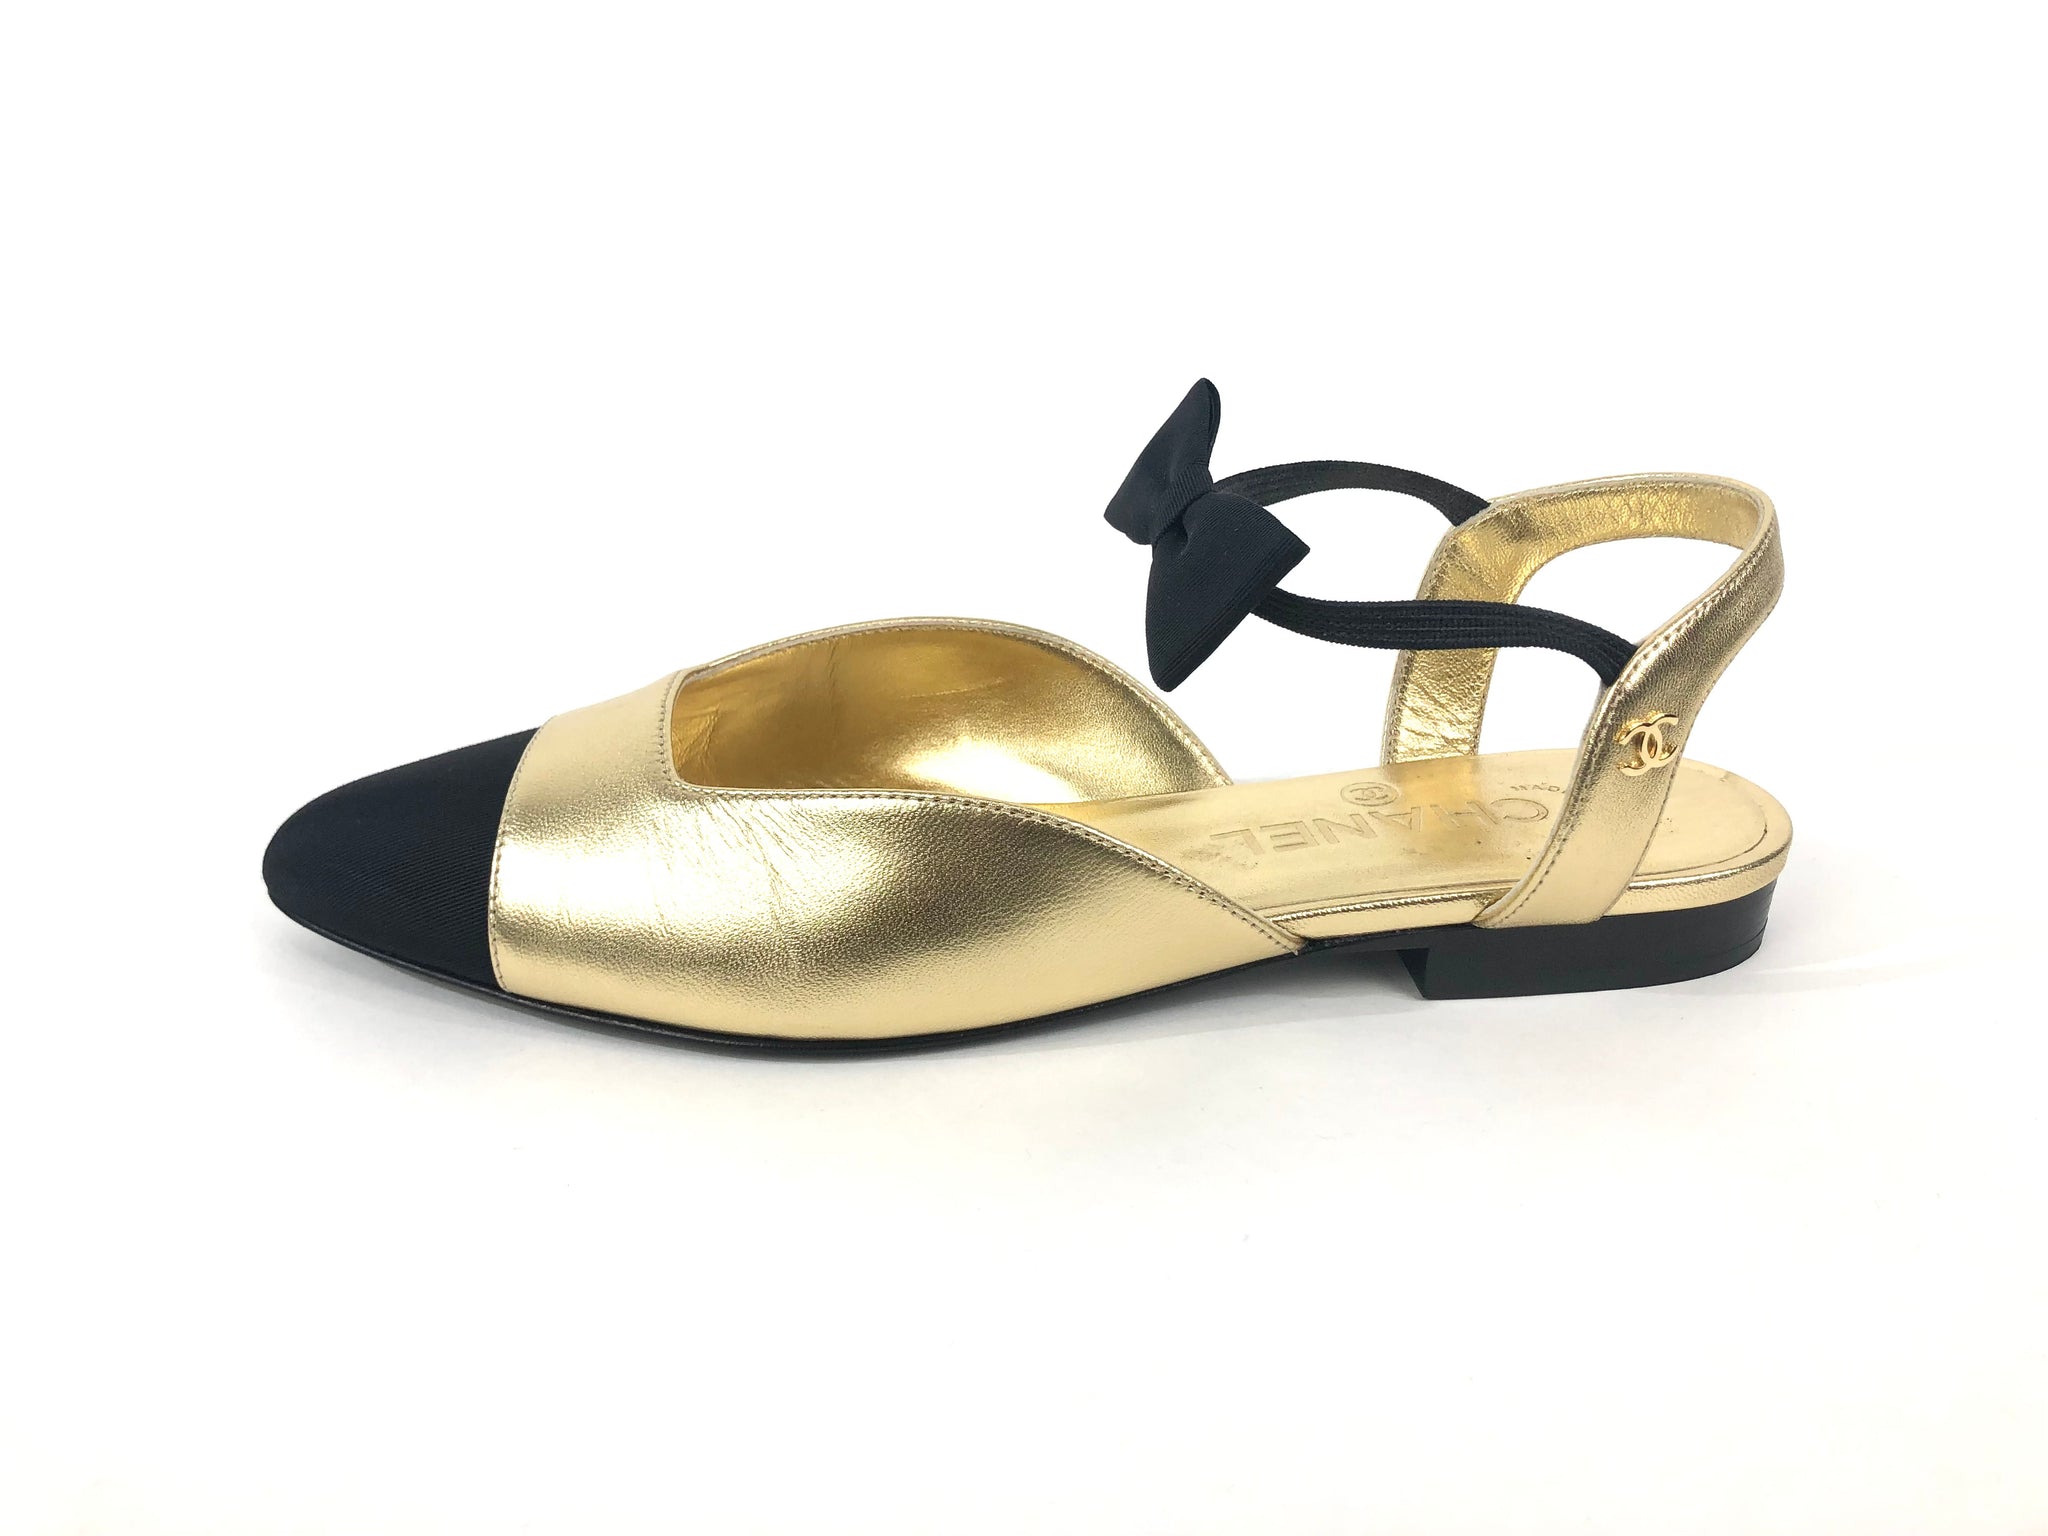 Black and Gold Bow Mary Jane Slingback Flats | Size 37.5